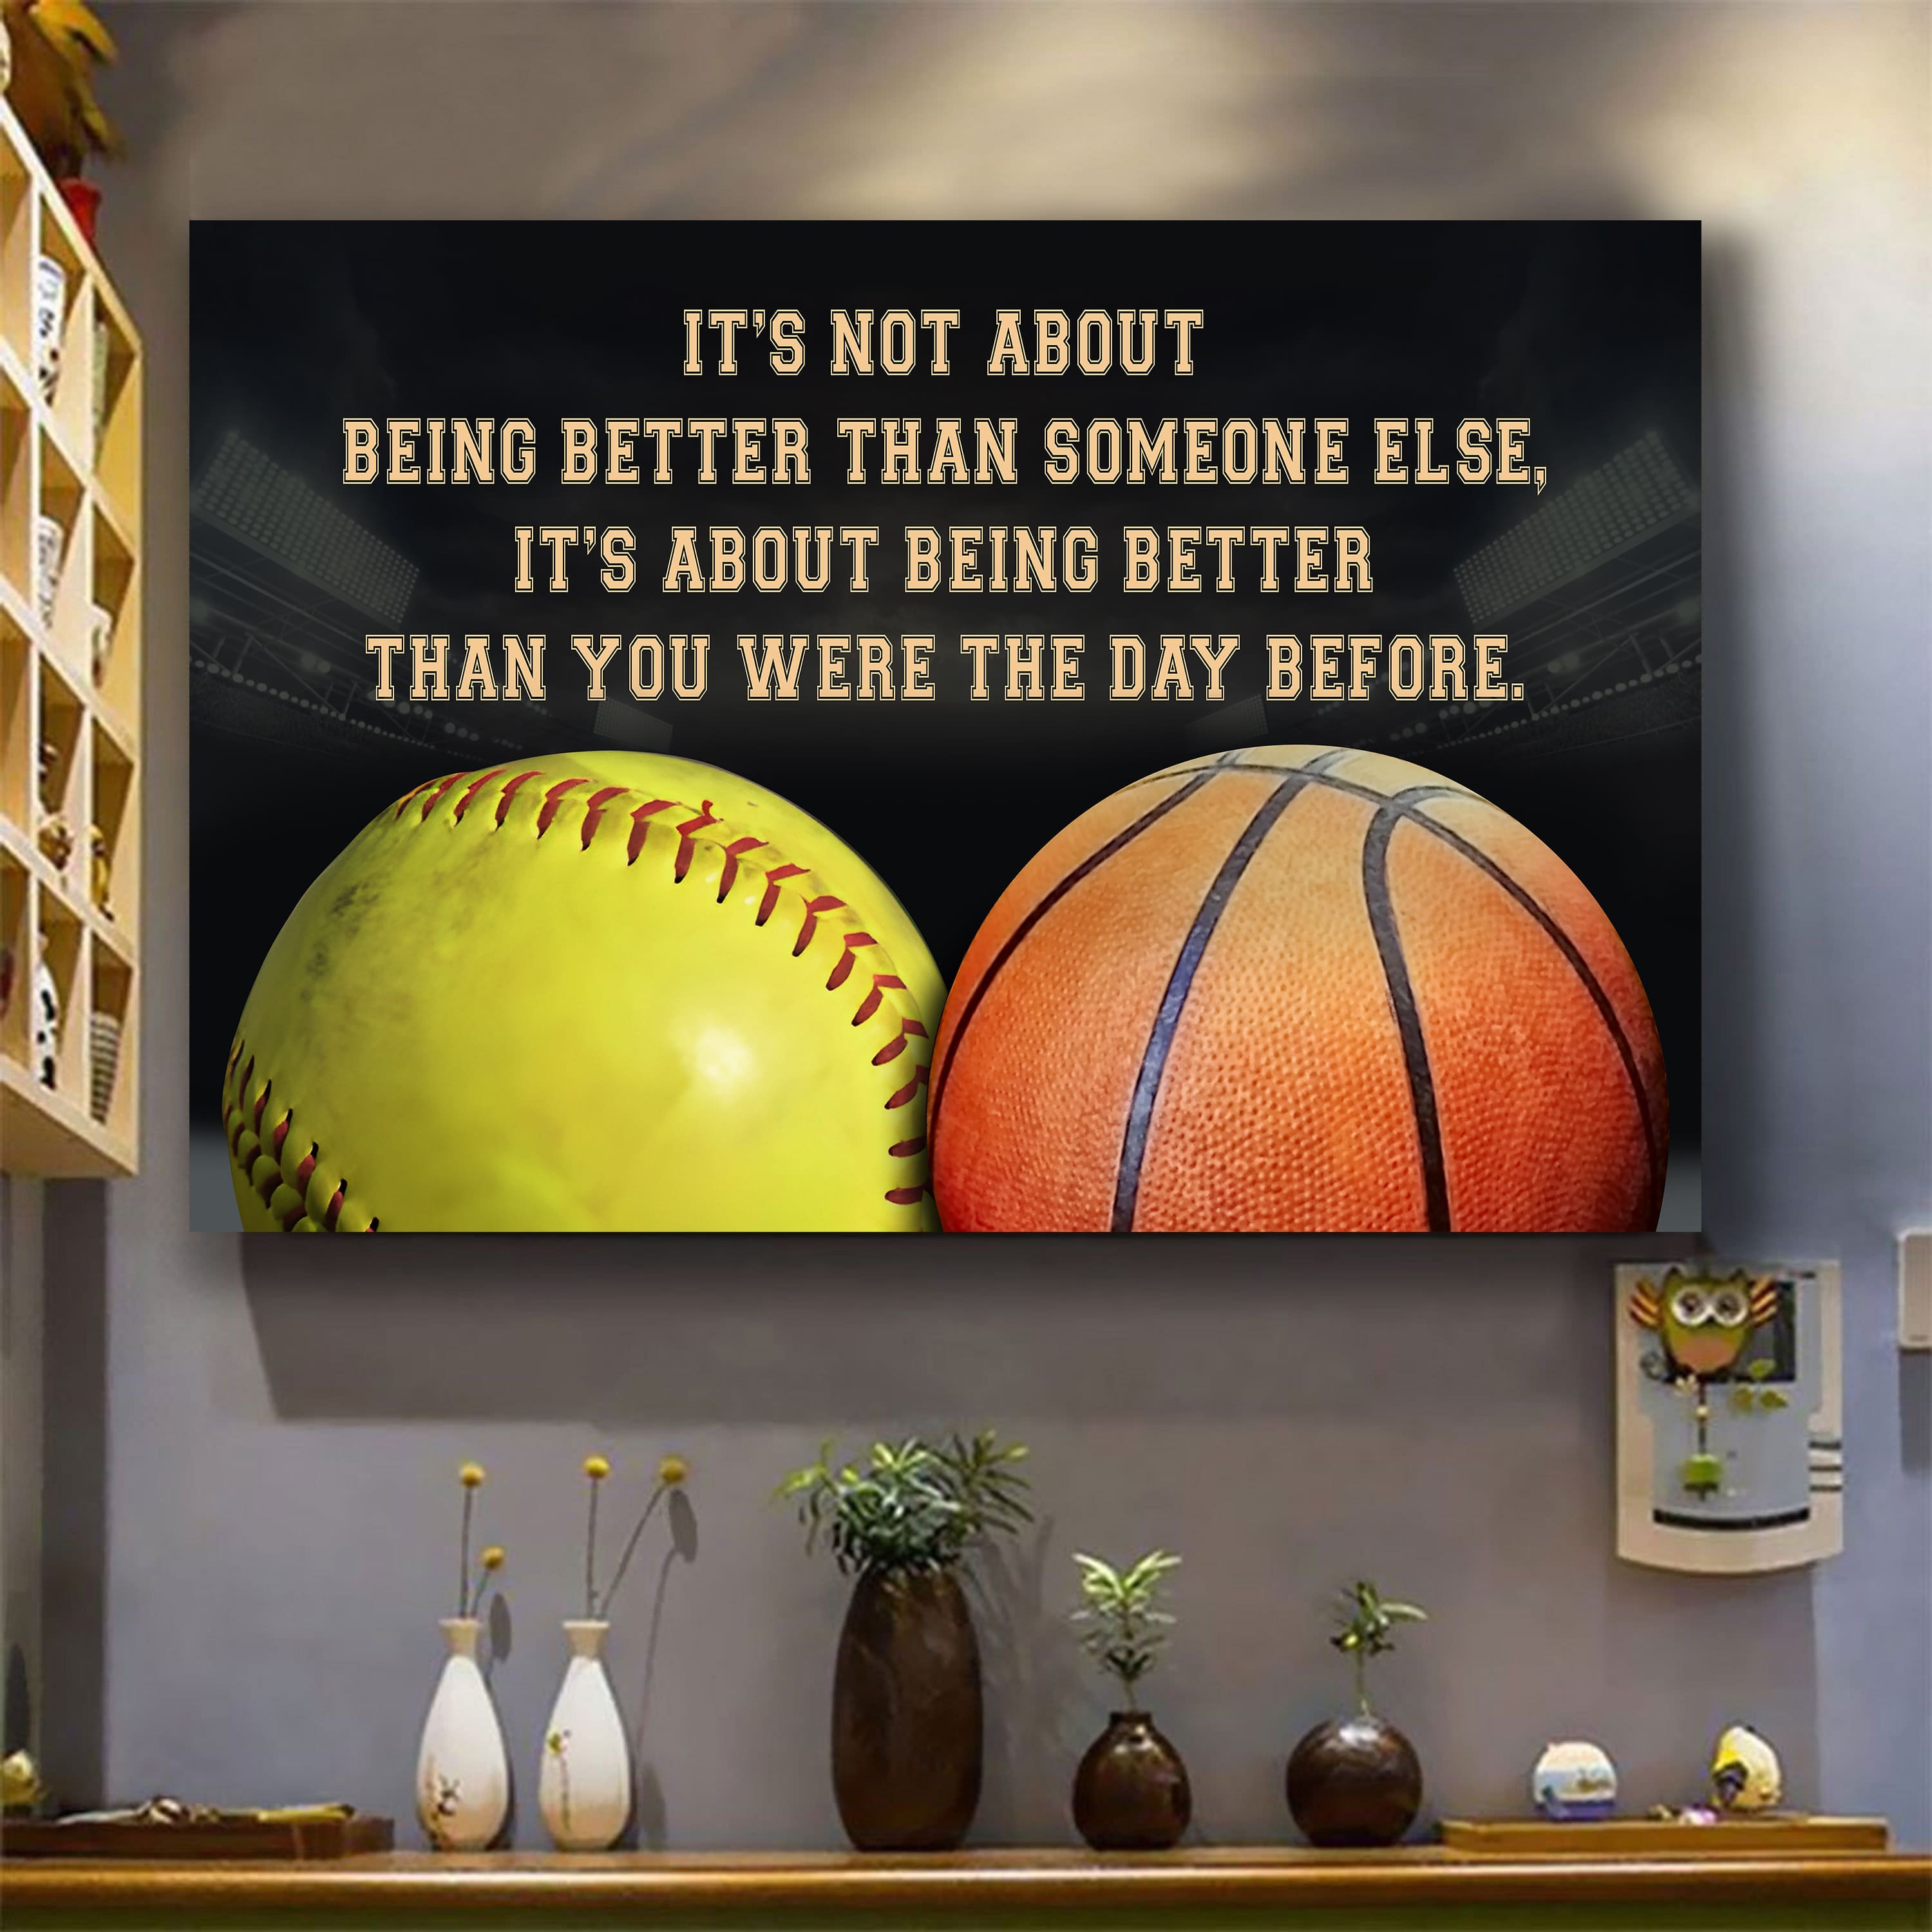 Softball and basketball customizable poster canvas - It is not about better than someone else, It is about being better than you were the day before